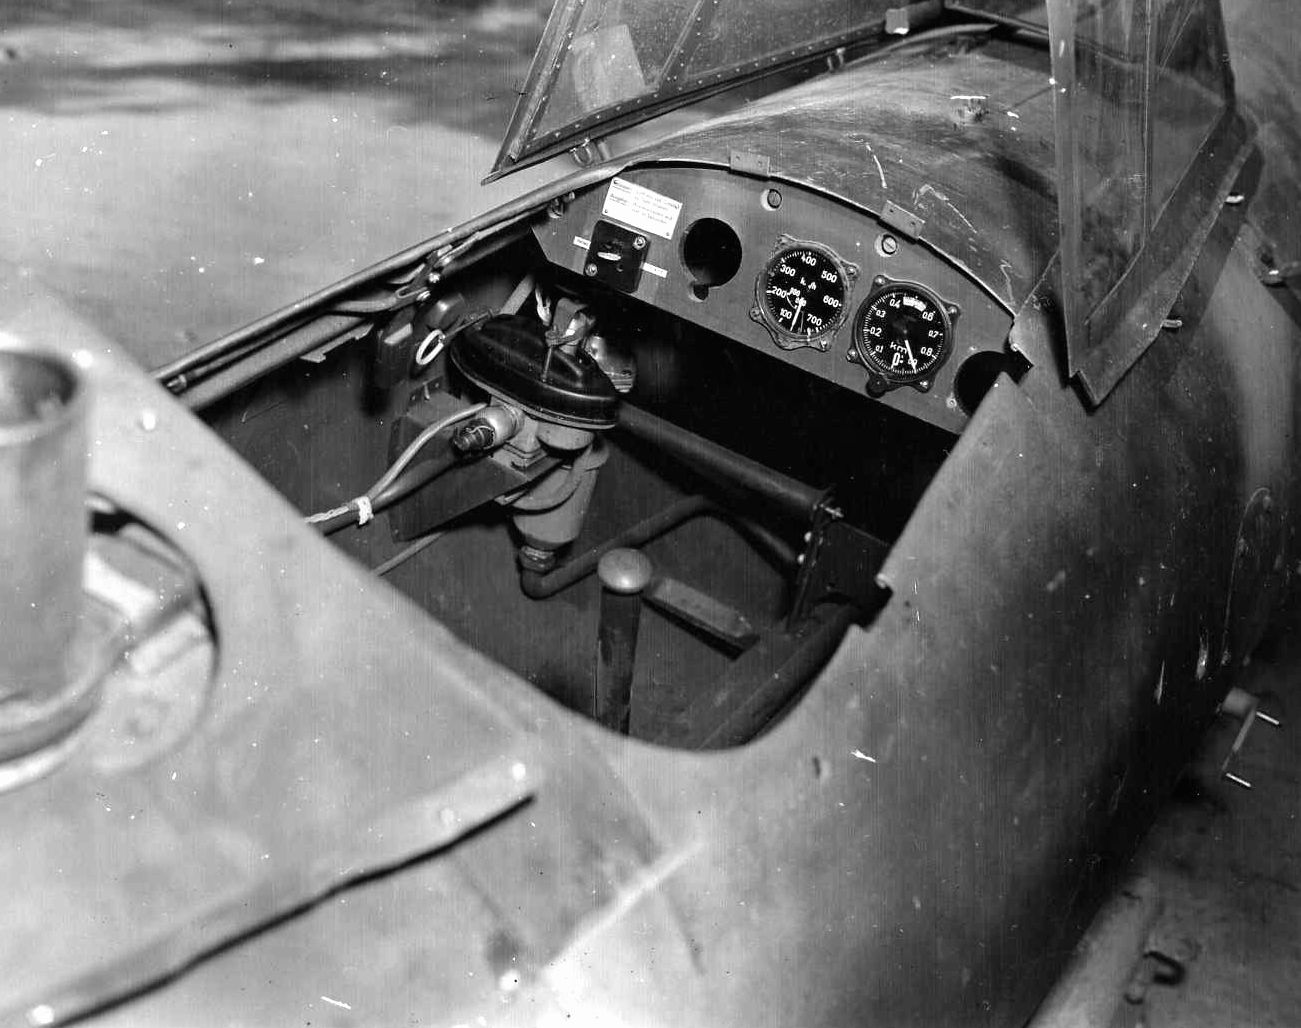 The cramped cockpit of the interior of a Rechenberg Project flying bomb is seen at an assembly facility captured by troops of the U.S. 29th Infantry Division.